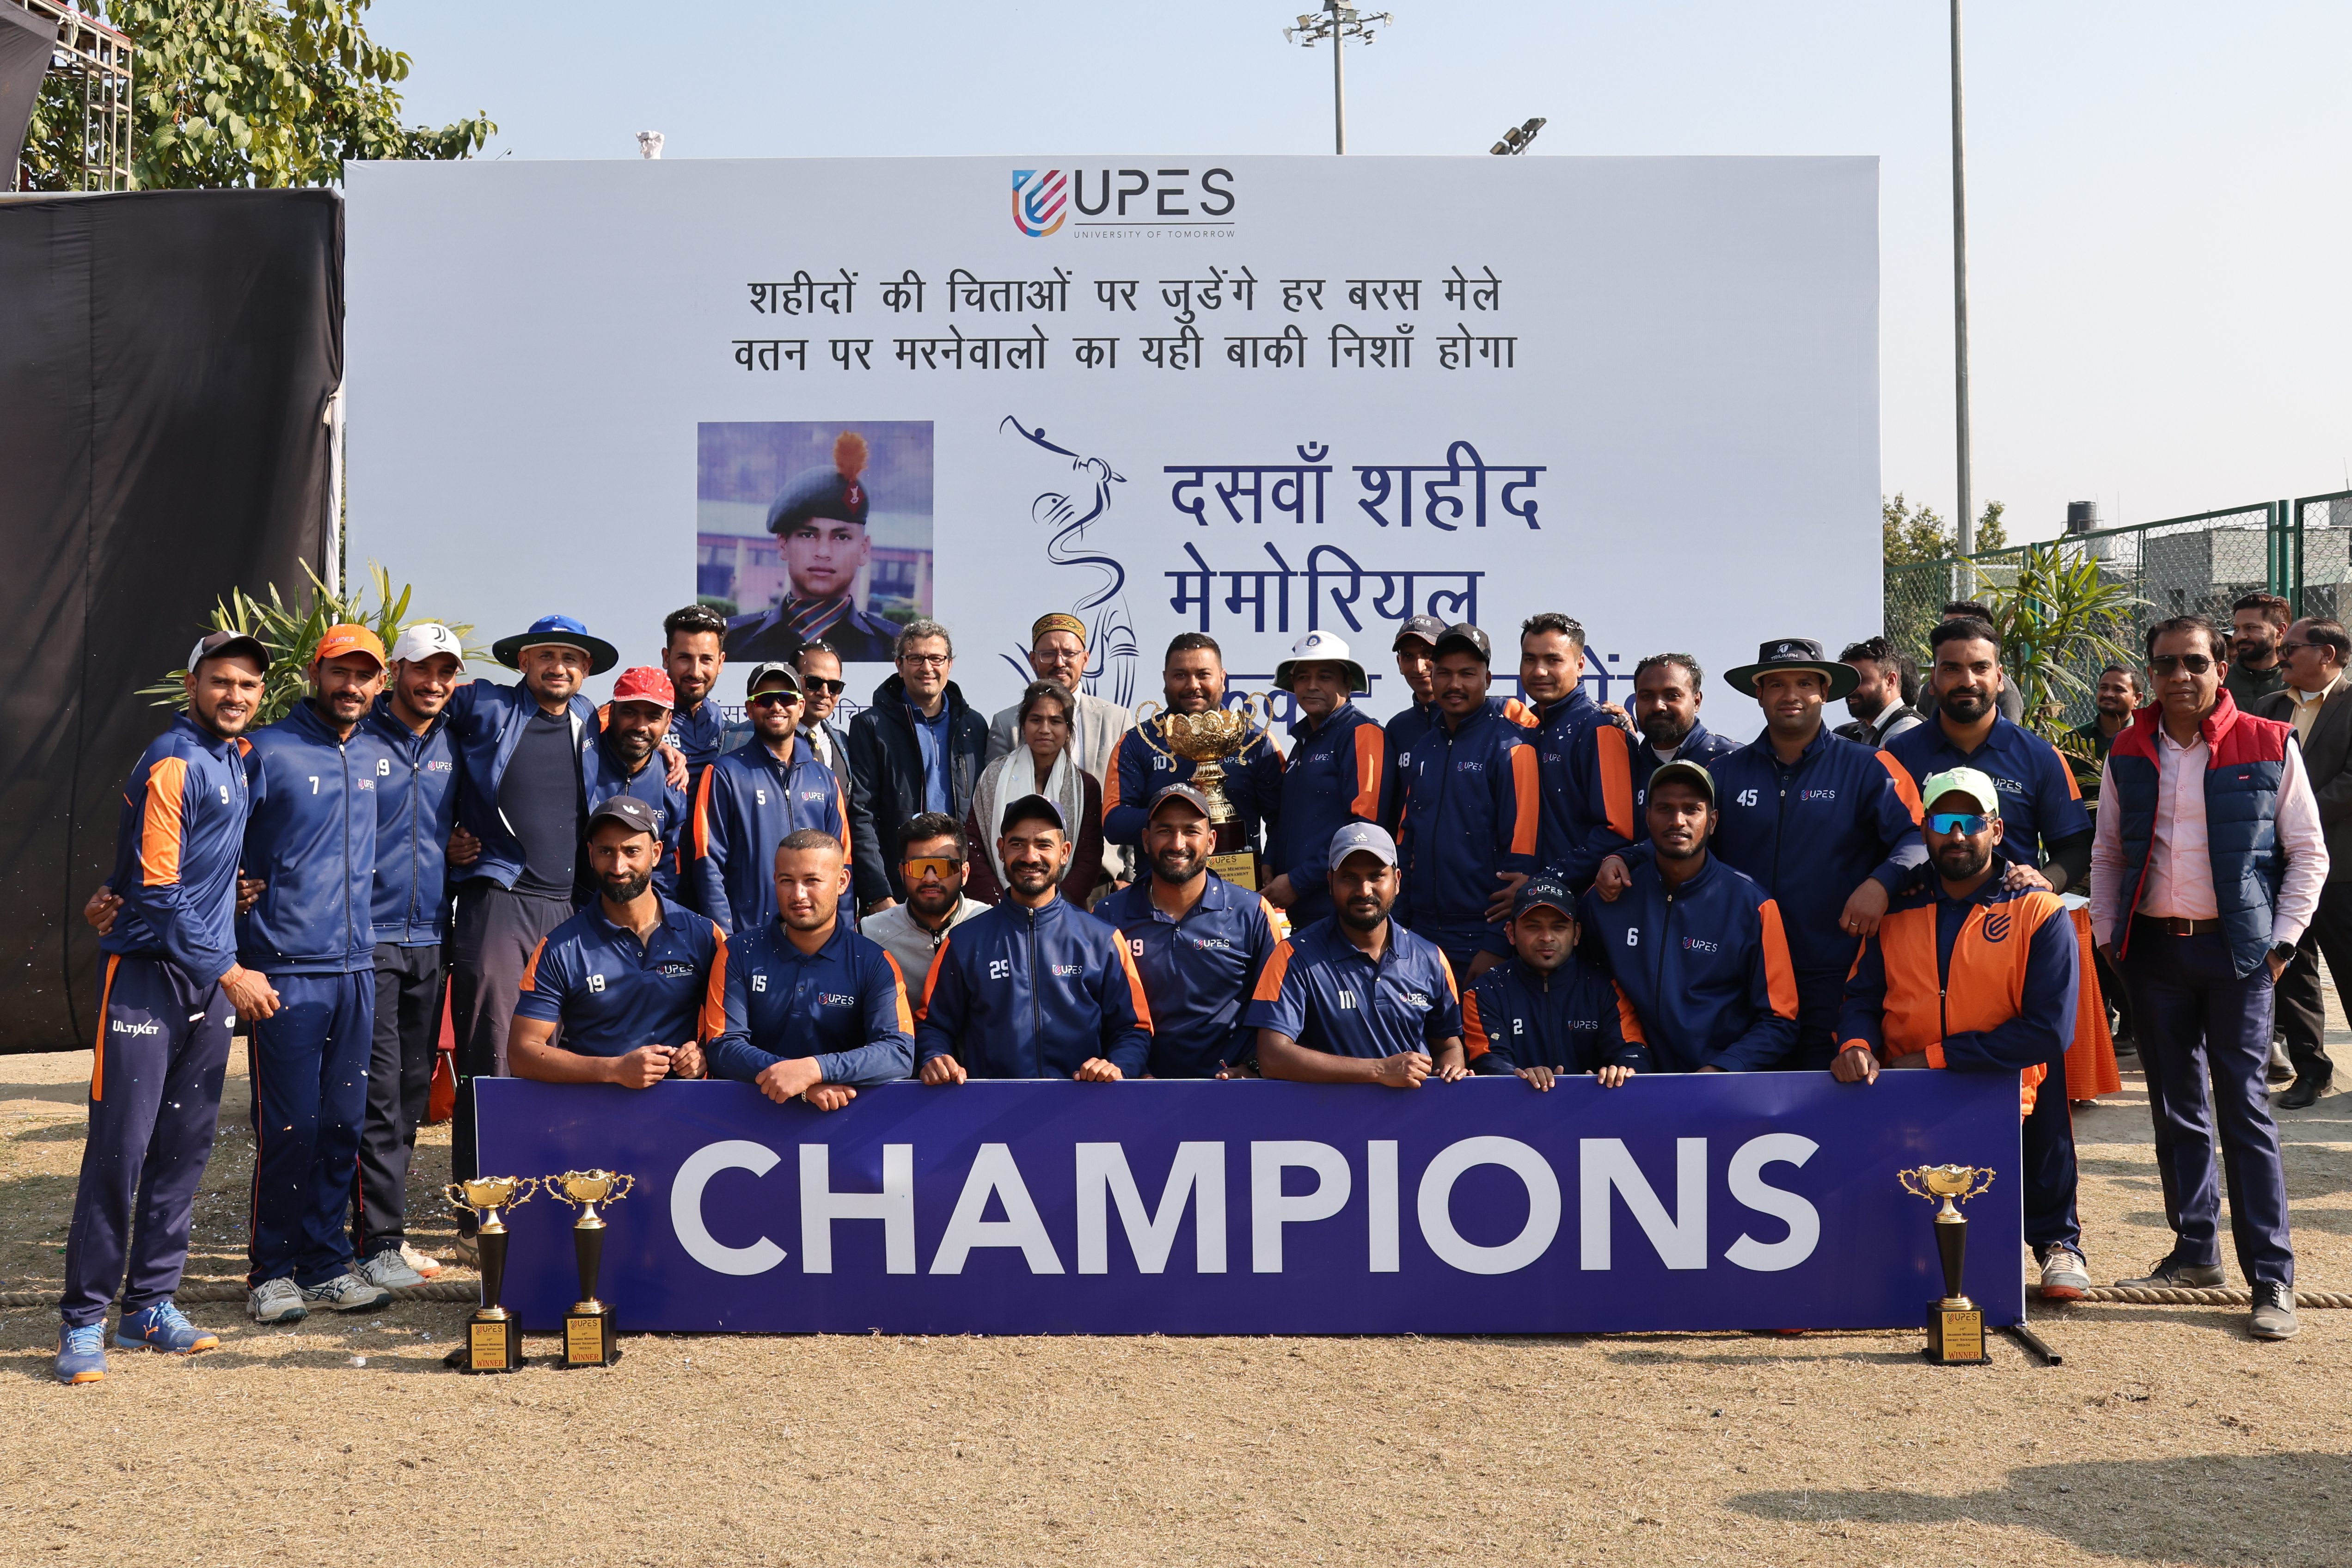 UPES Blue Shines Bright: Champions Crowned in 10th Shaheed Memorial Cricket Tournament